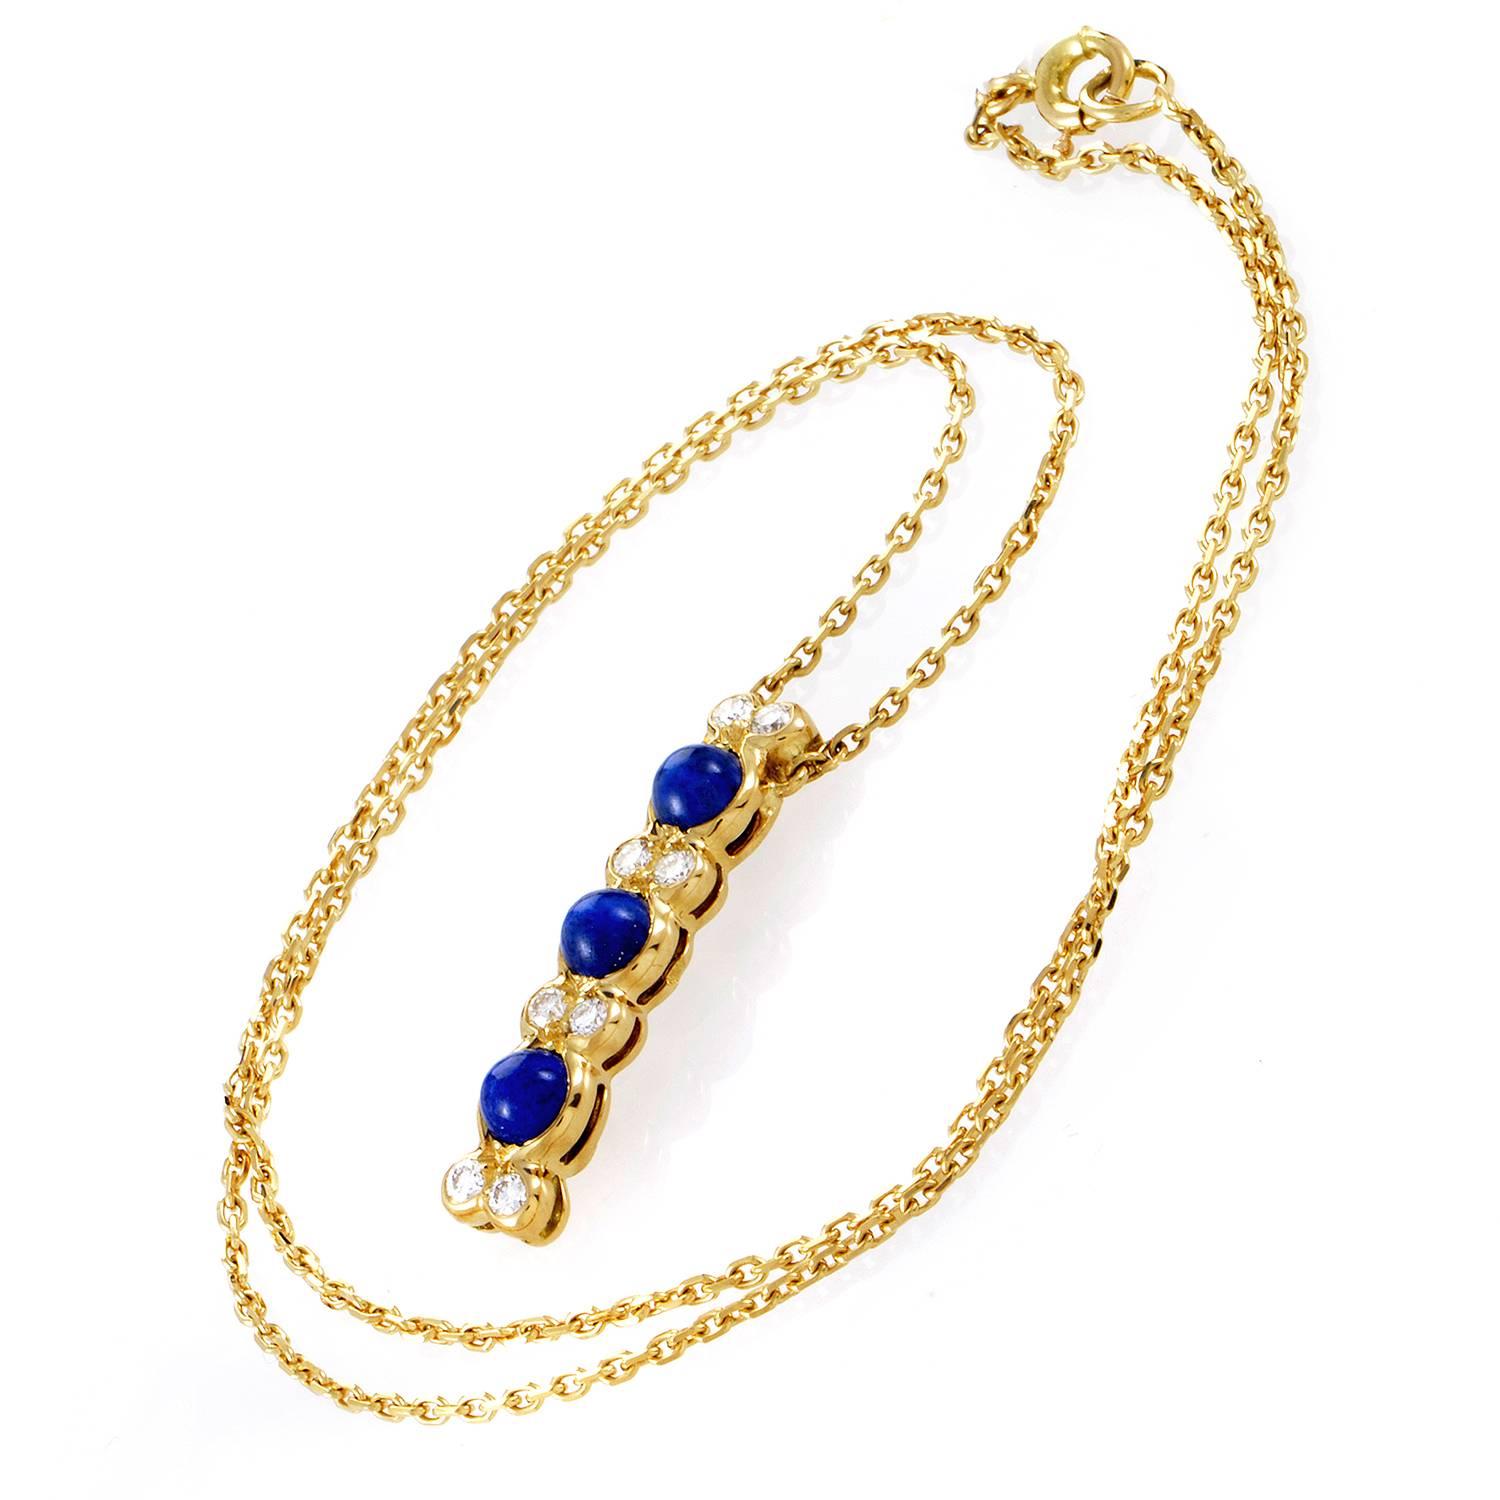 Employing the sheer luxurious allure of diamonds totaling 0.40ct and the intrinsic elegance of the splendid lapis nuance, this gorgeous necklace from Chaumet combines them in a tasteful manner upon the prestigious reflective surface of 18K yellow